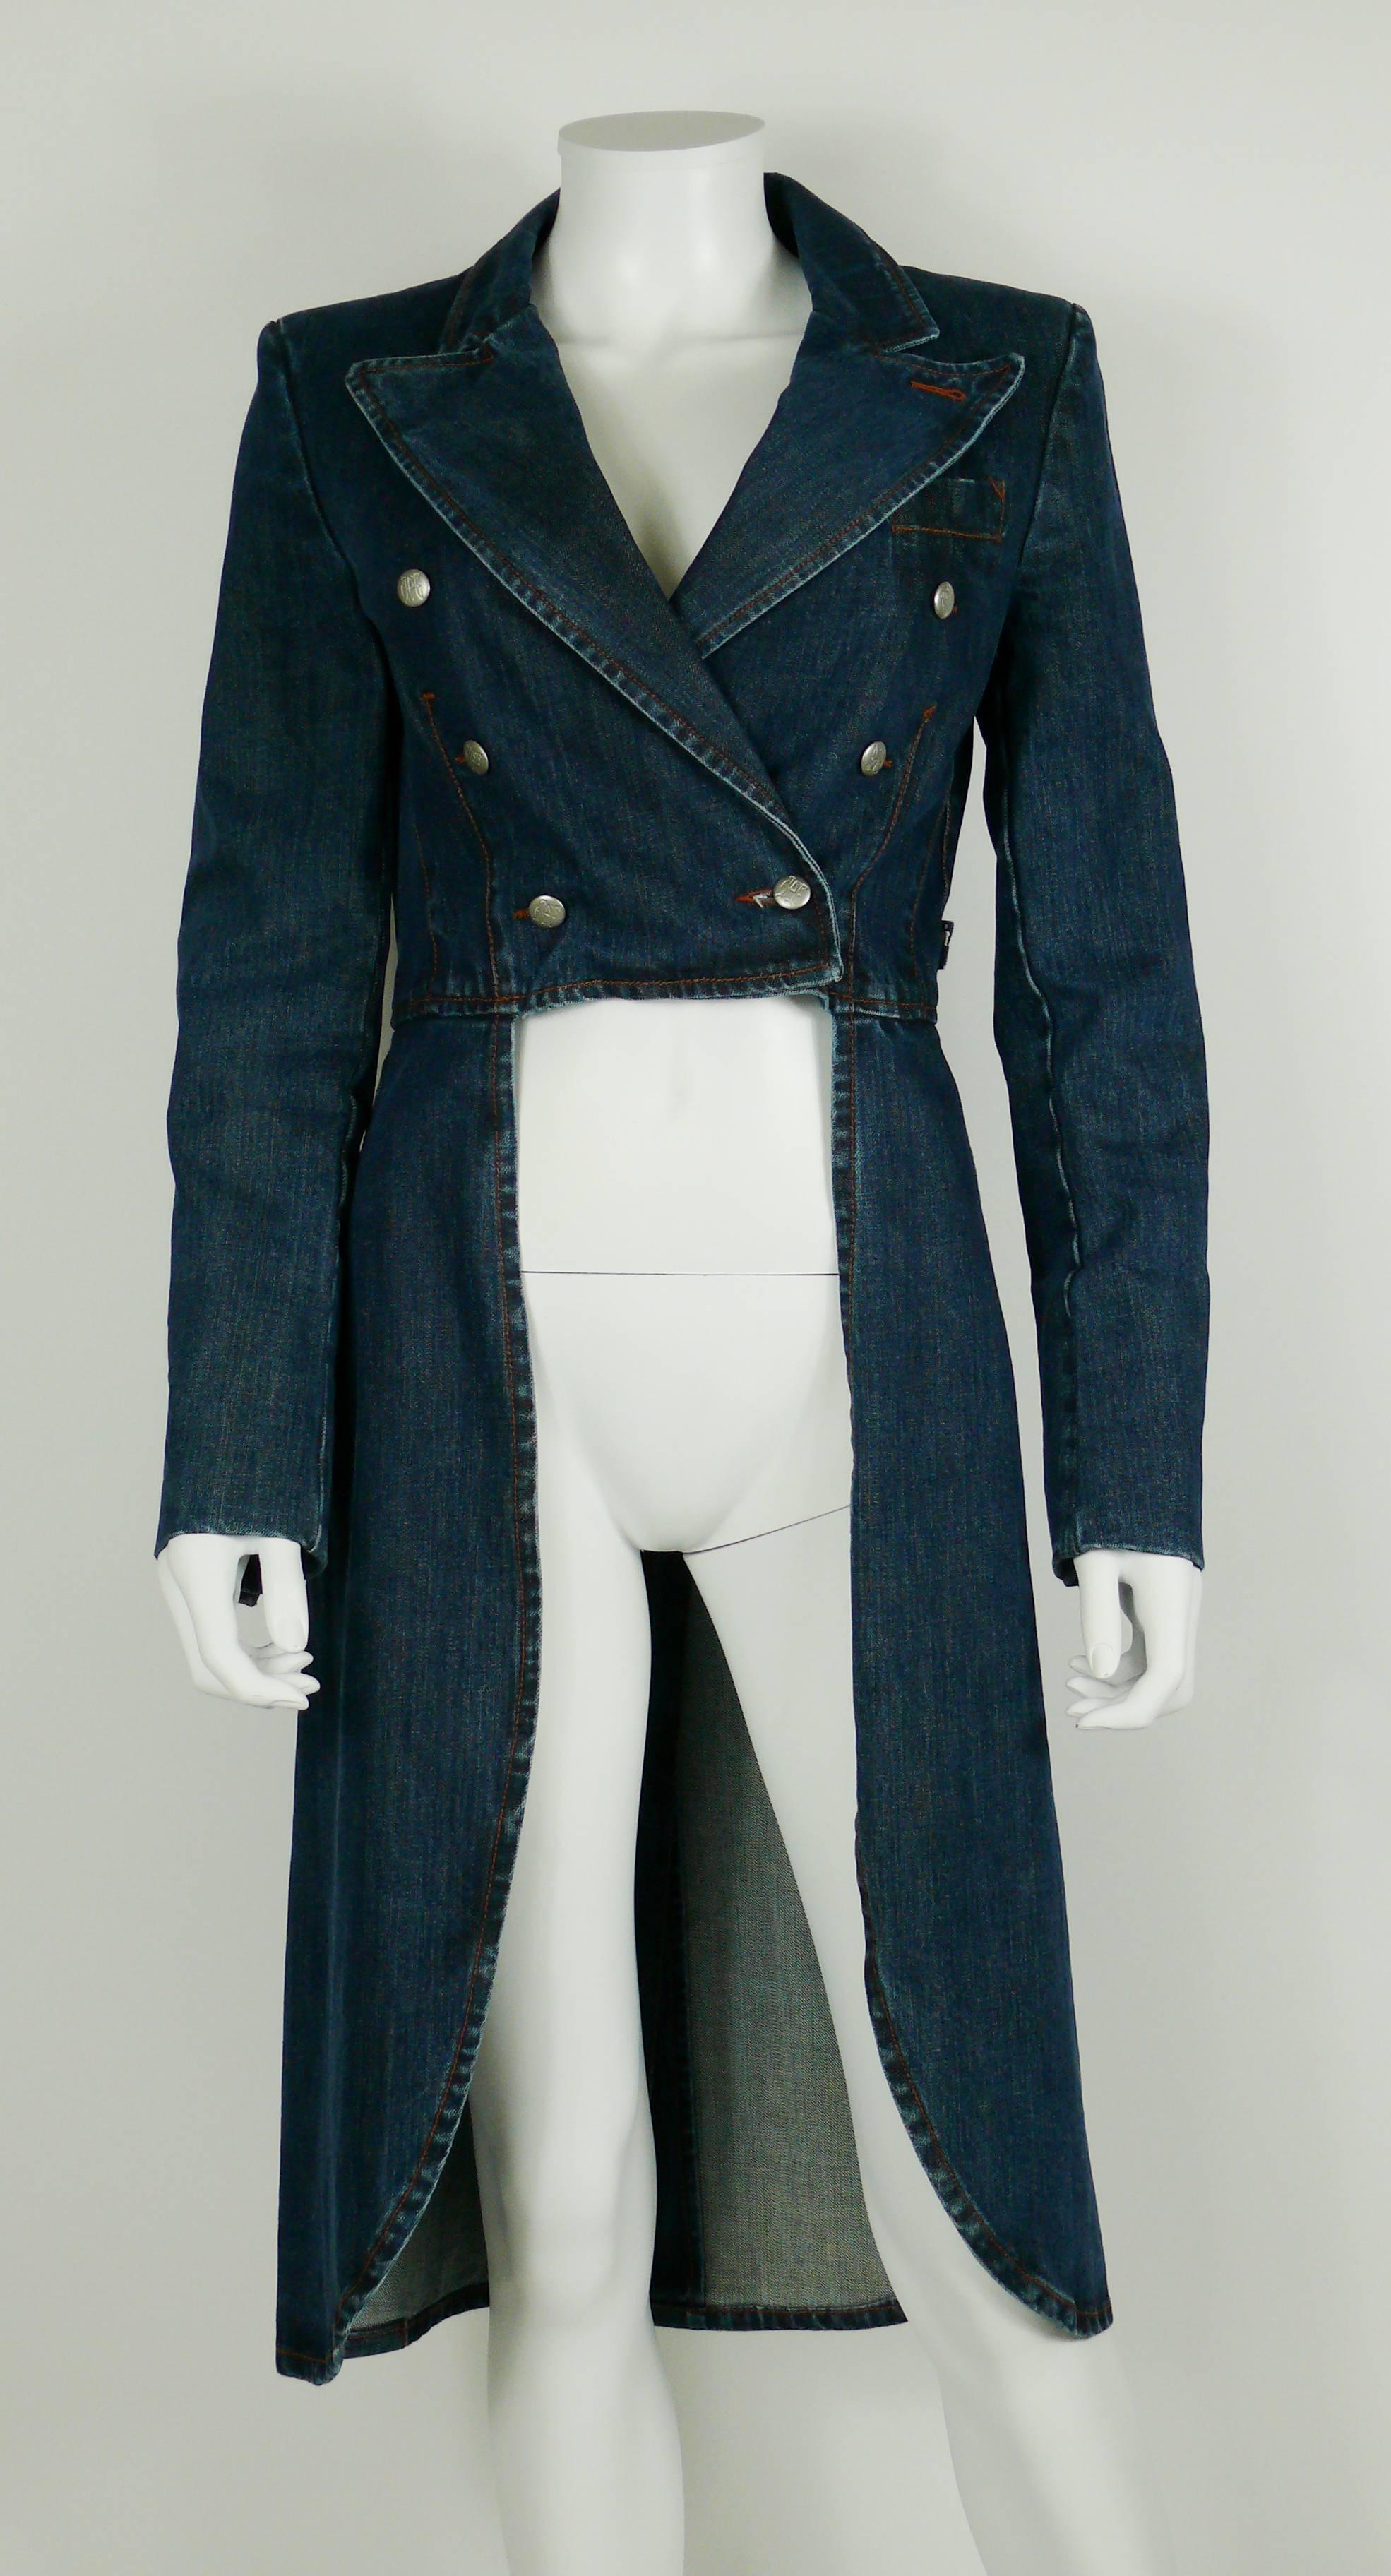 JEAN PAUL GAULTIER gorgeous denim tailcoat.

Double breasted buttons at the front.
Open front and wide collar.
Exaggerated long tails at the back.
Shoulder pads inside lining.

Label reads JPG Jean's.

Size label reads : I 40 / USA 6 / F 36 / GB 10